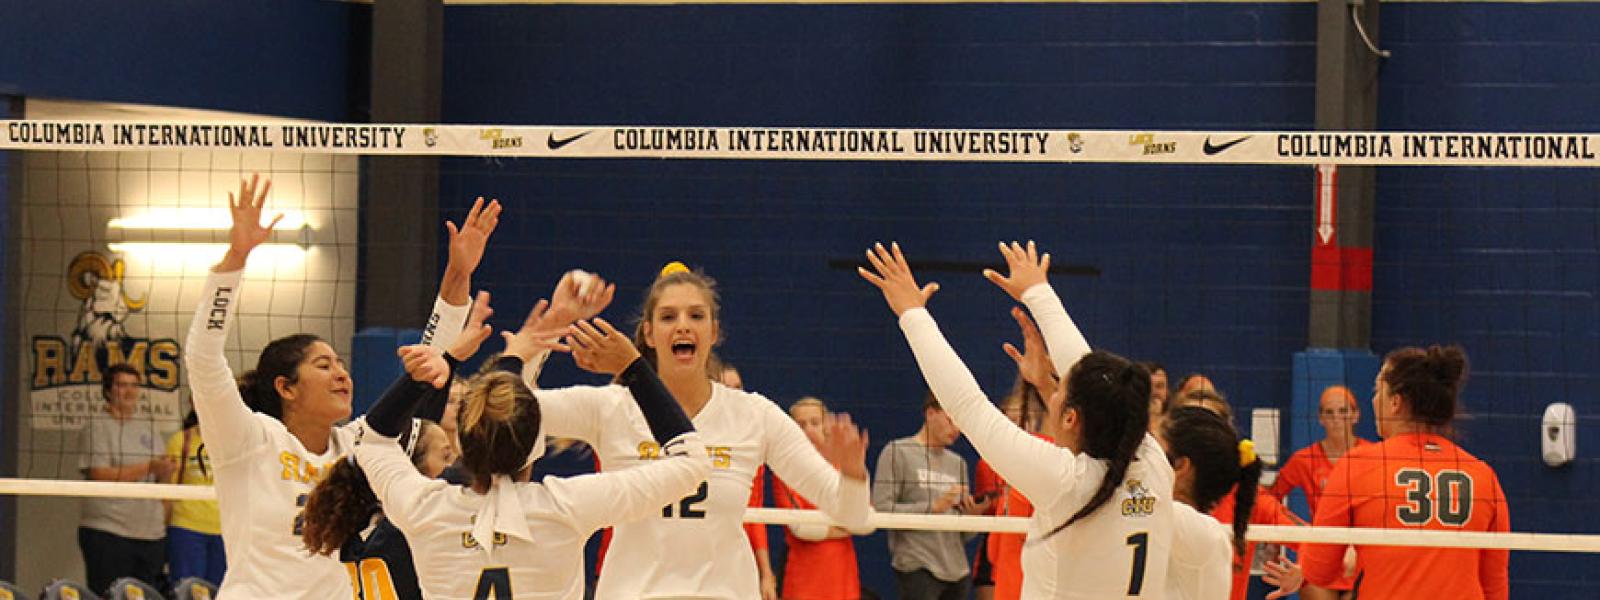 High fives all around on a big night for CIU volleyball. (Photos by Andrea Calamoro)